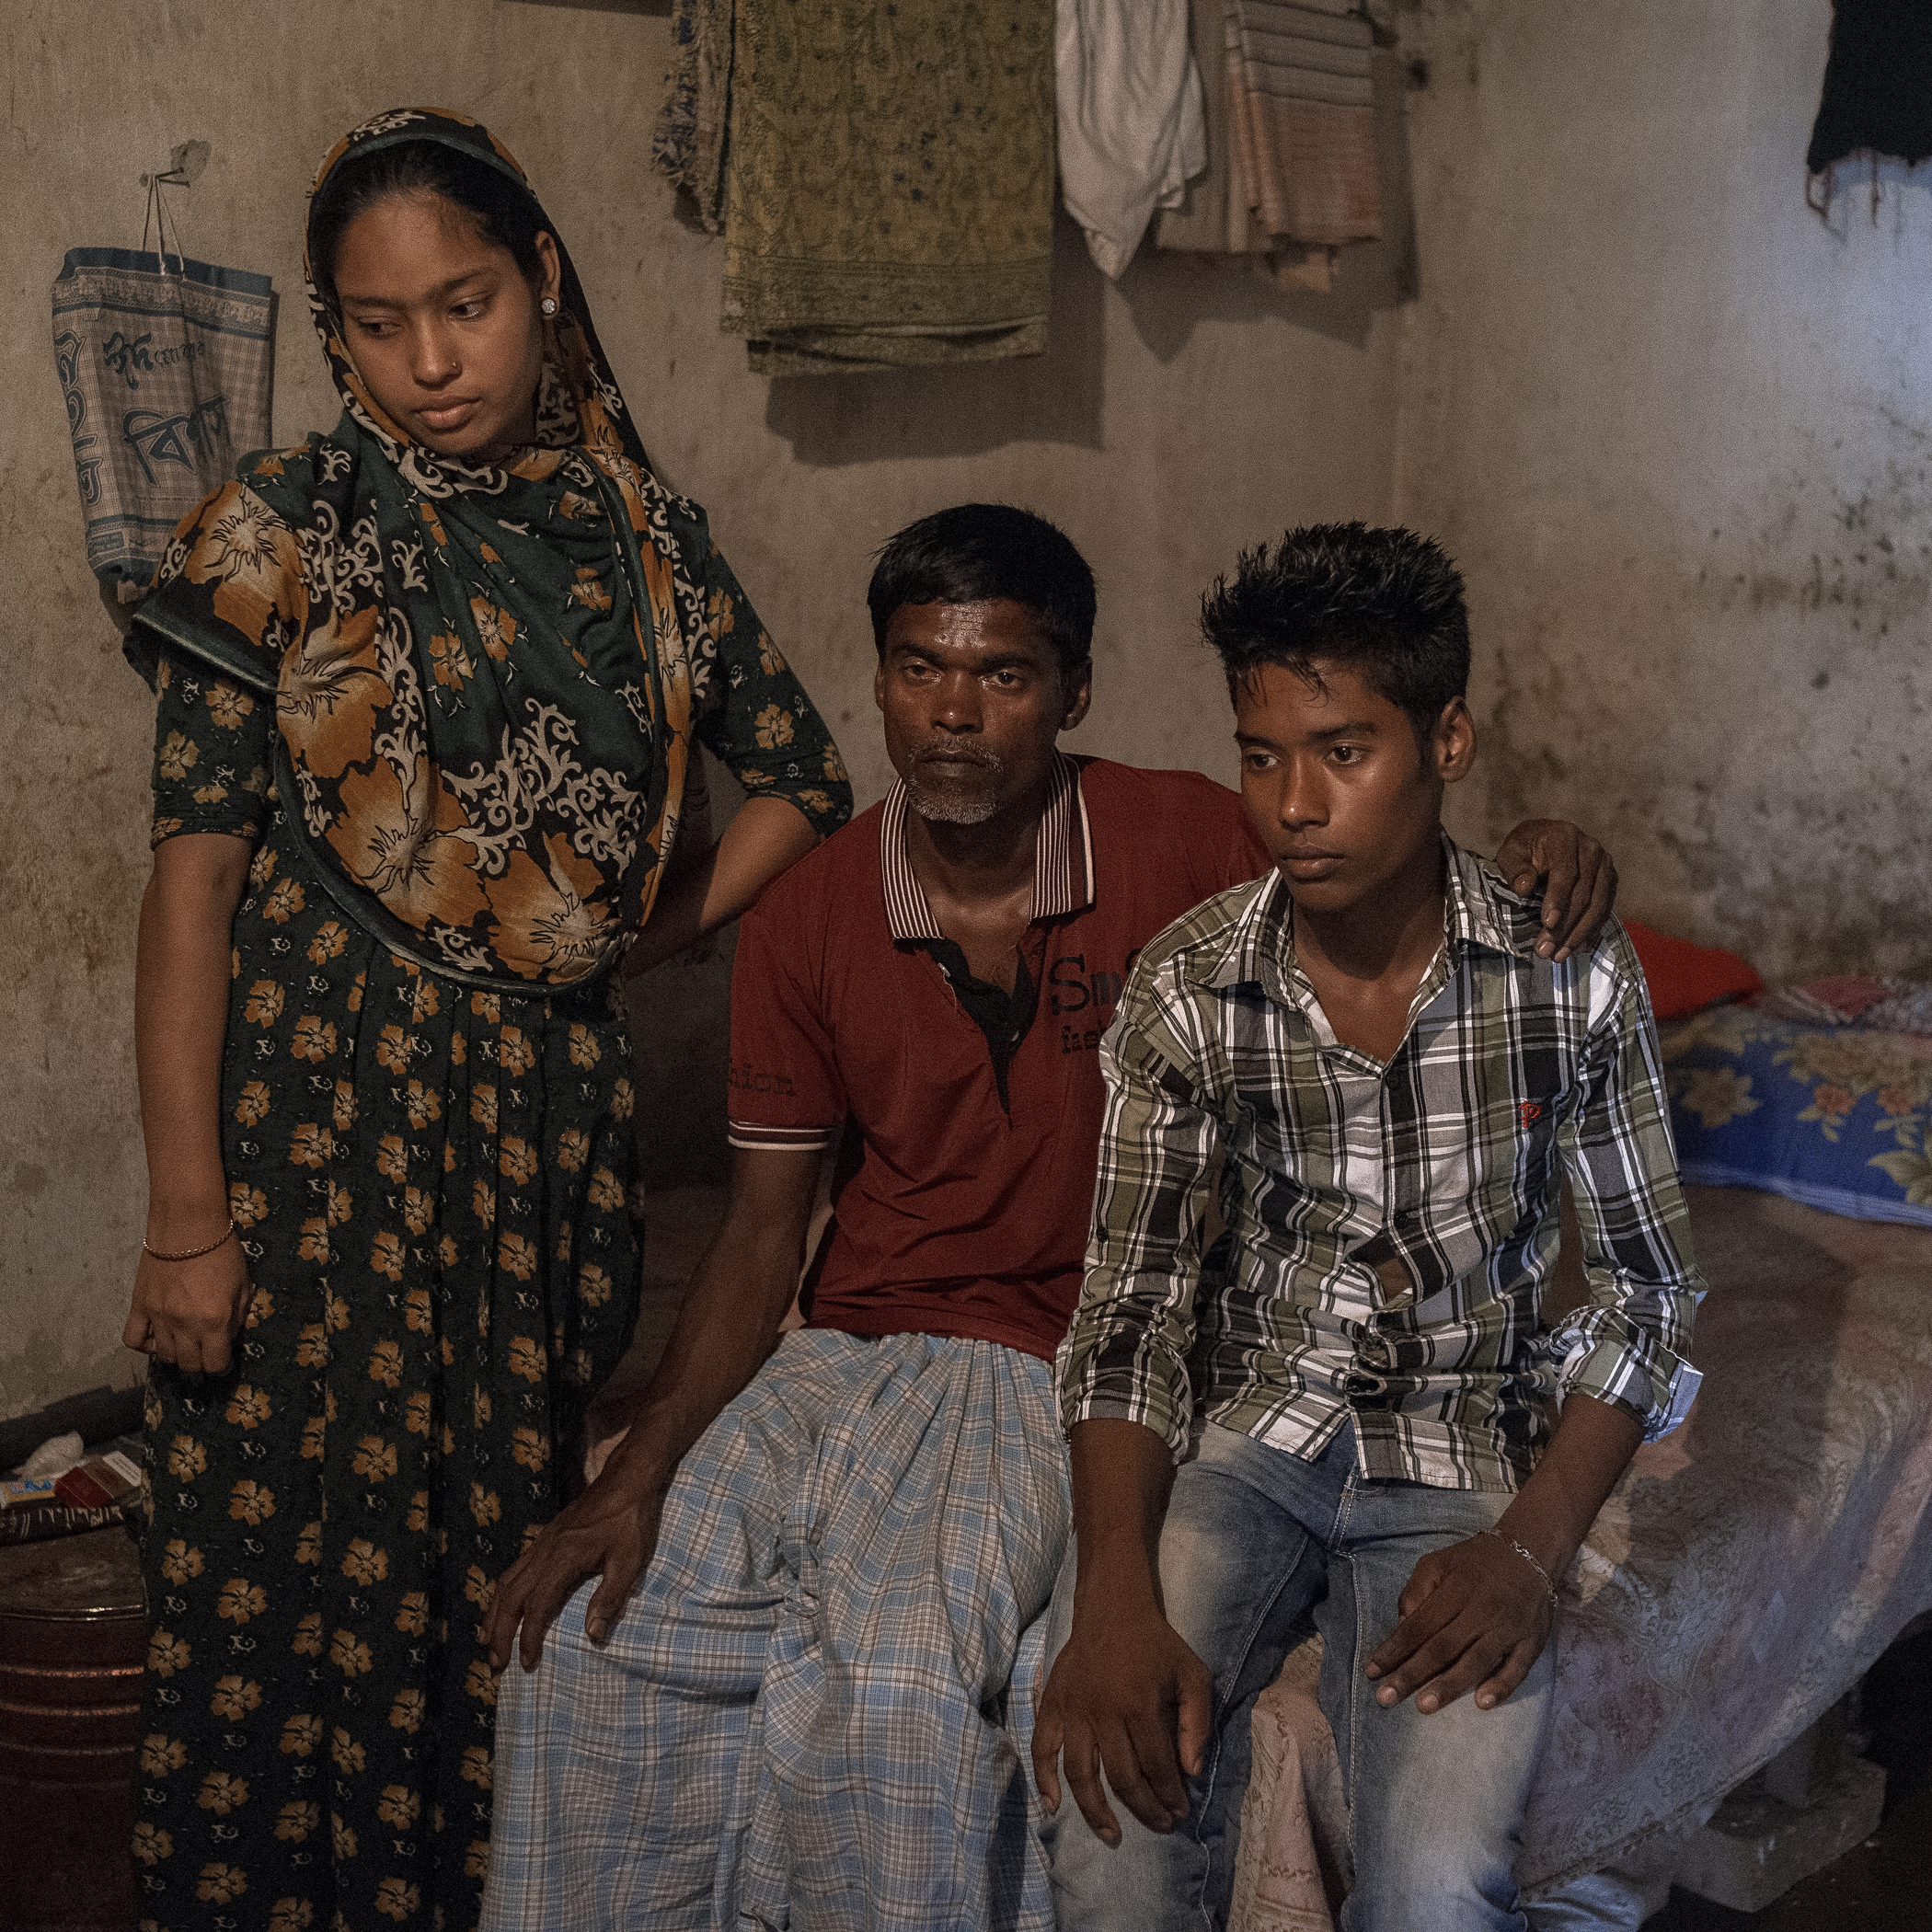 Jahidul now lives with his new wife Mahmuda and his son Jakir in their old house.